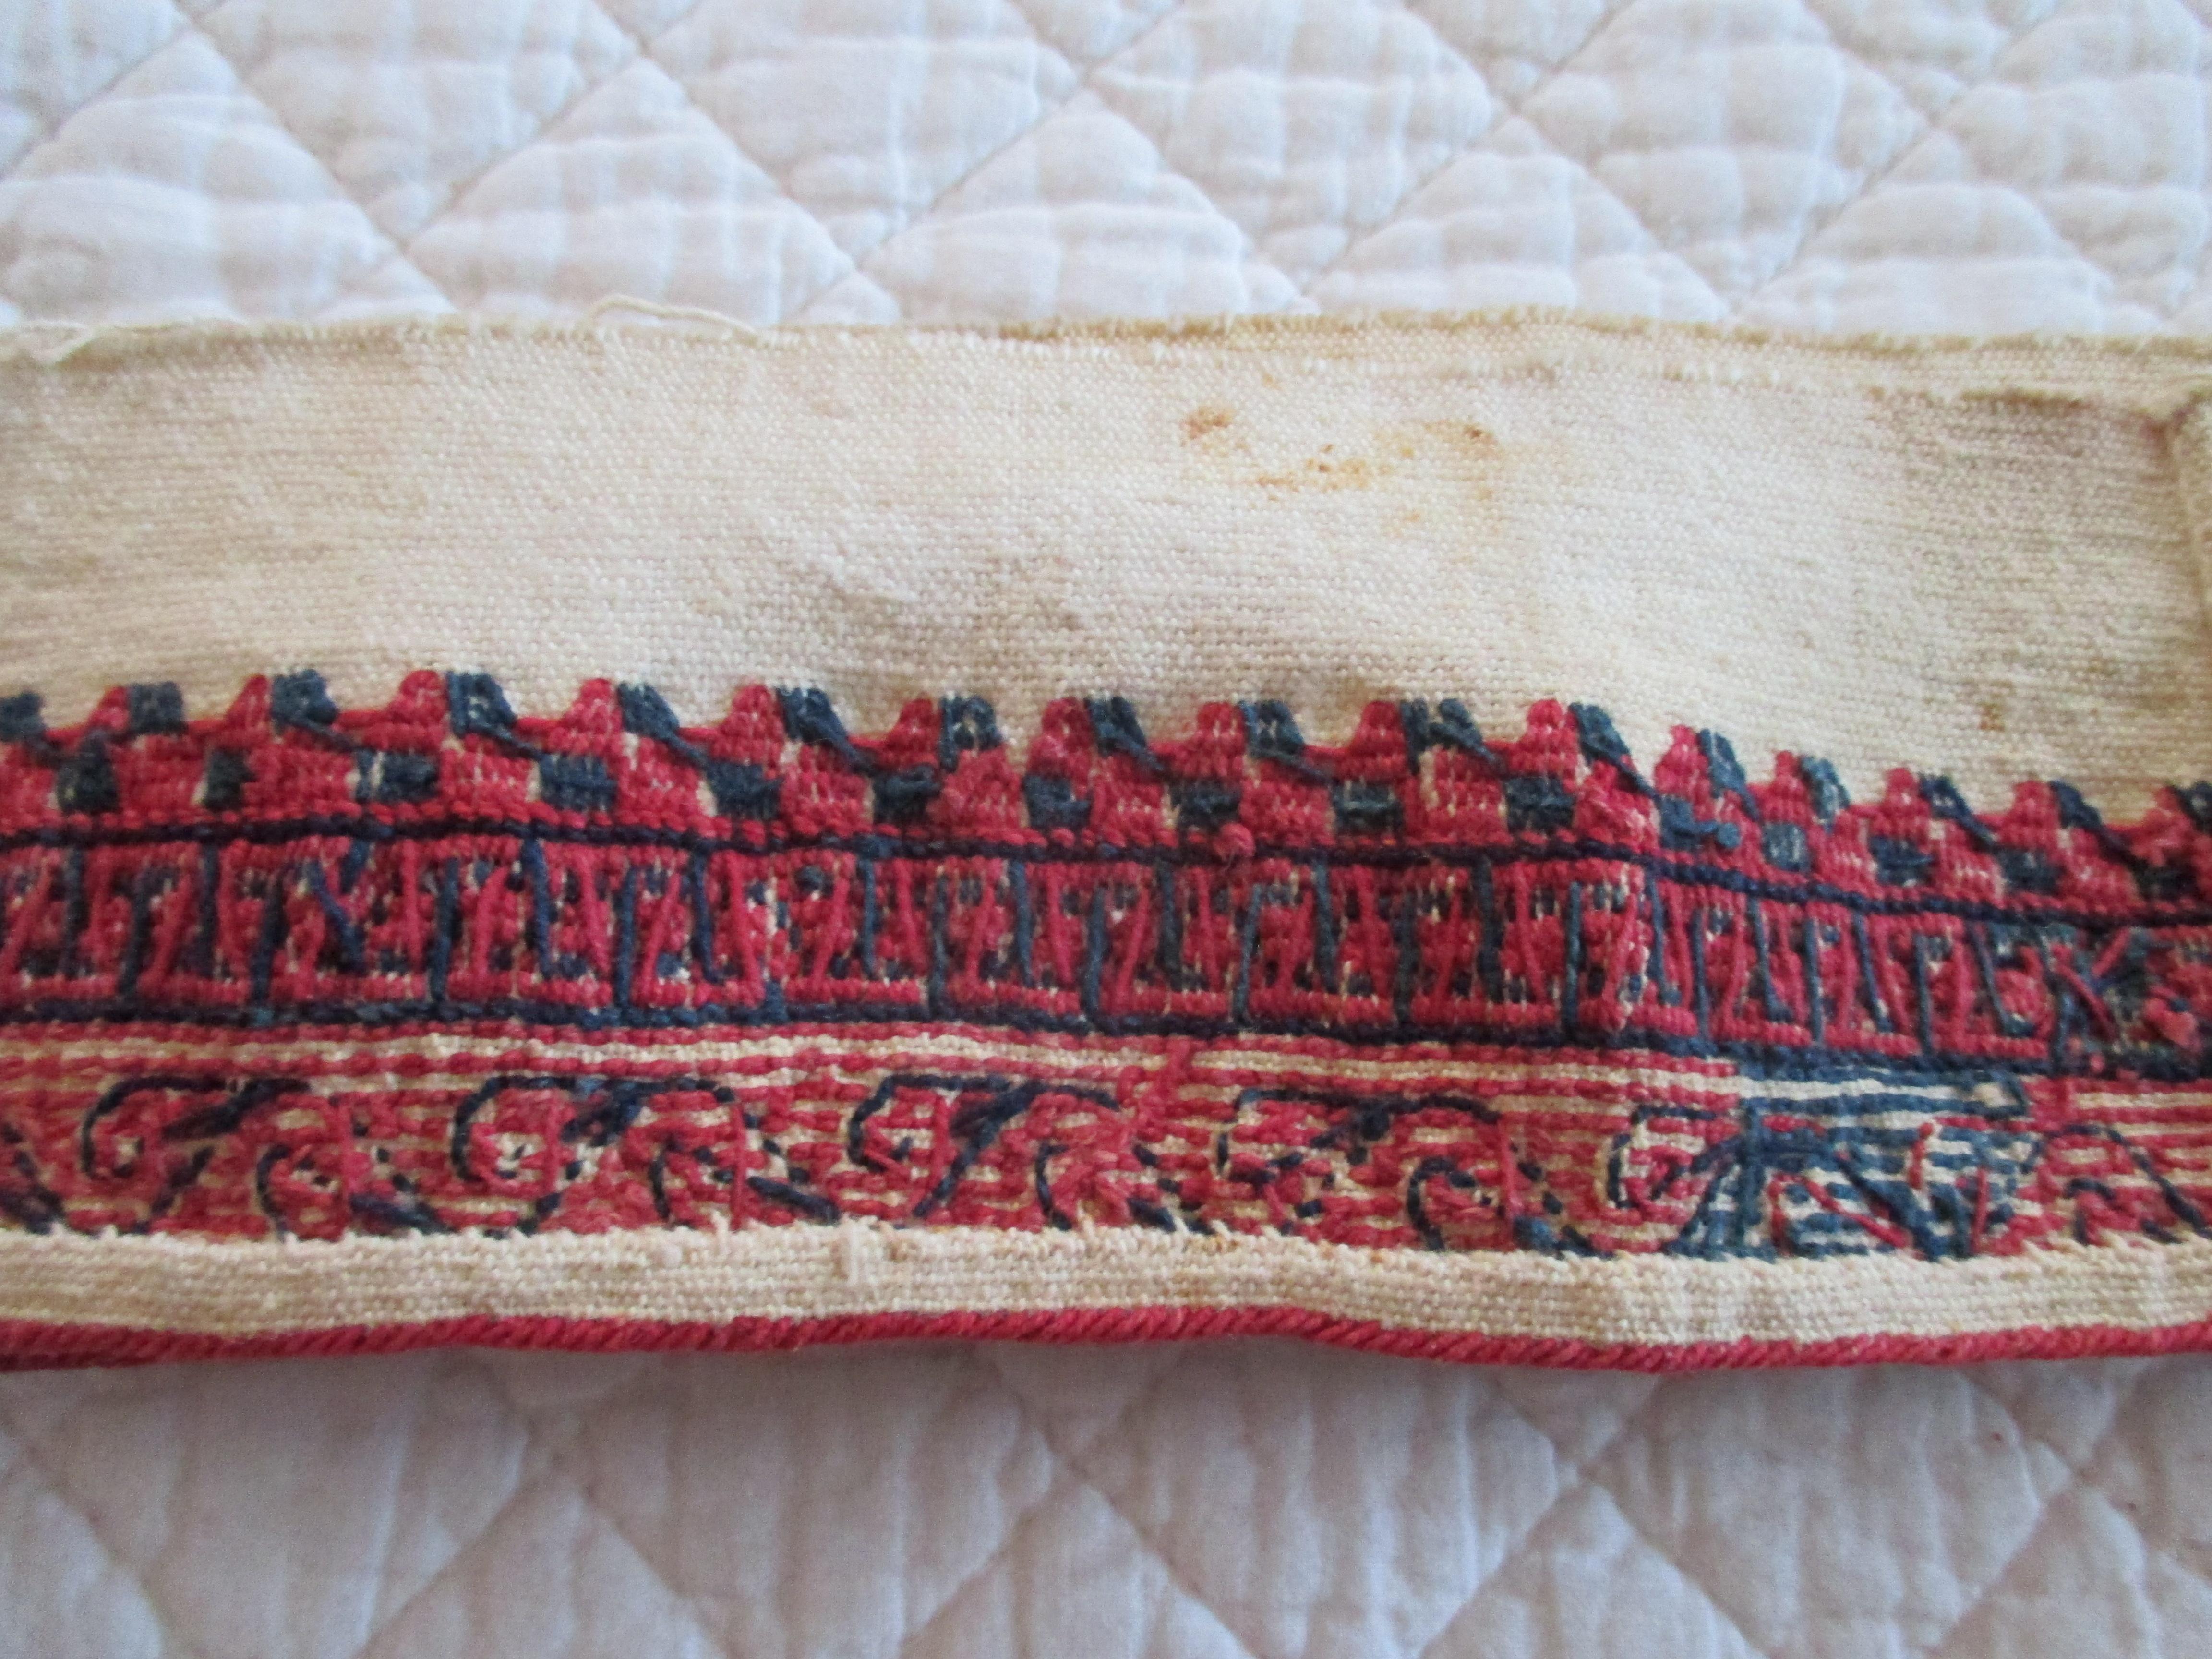 Nepalese Antique Red and Blue Woven Decorative Linen Trim